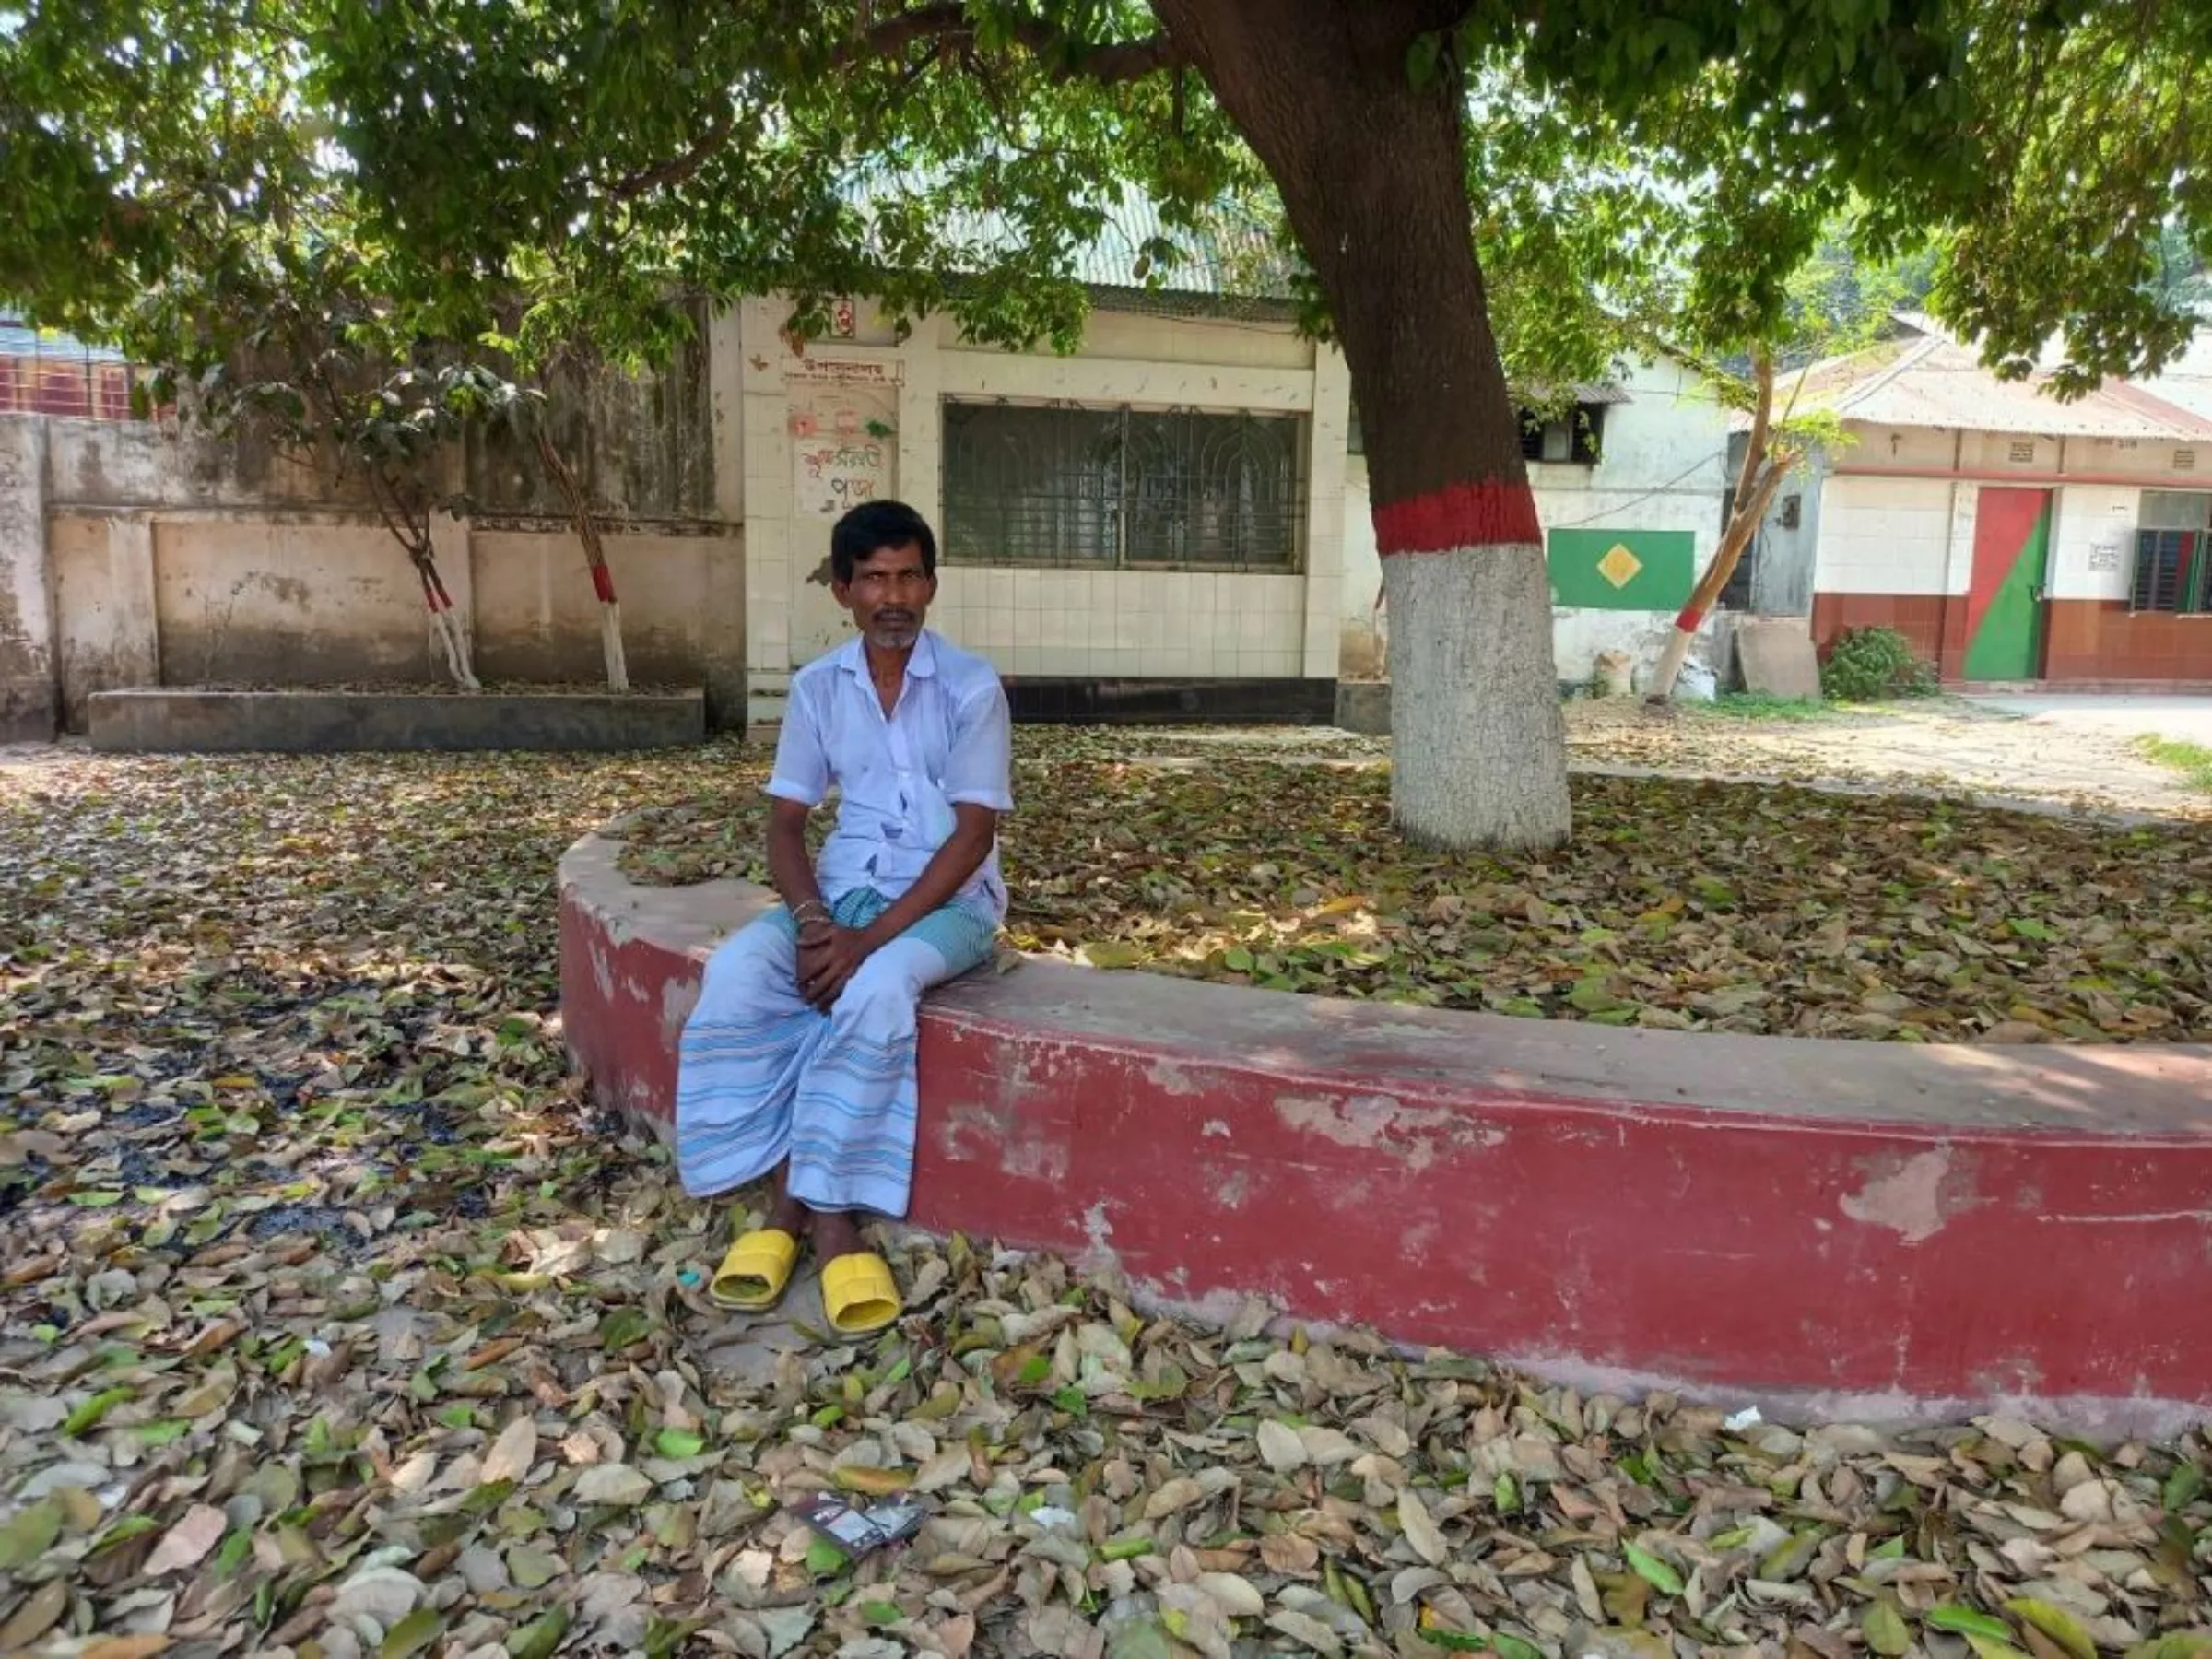 Subal Moni Rishi, 53, a night guard at a local school, sits for a photo in Savar, Bangladesh, April, 17, 2023. Rishi helped hand over the remains of the Rana Plaza victims to their families, and still gets vivid flashbacks of the 2013 tragedy